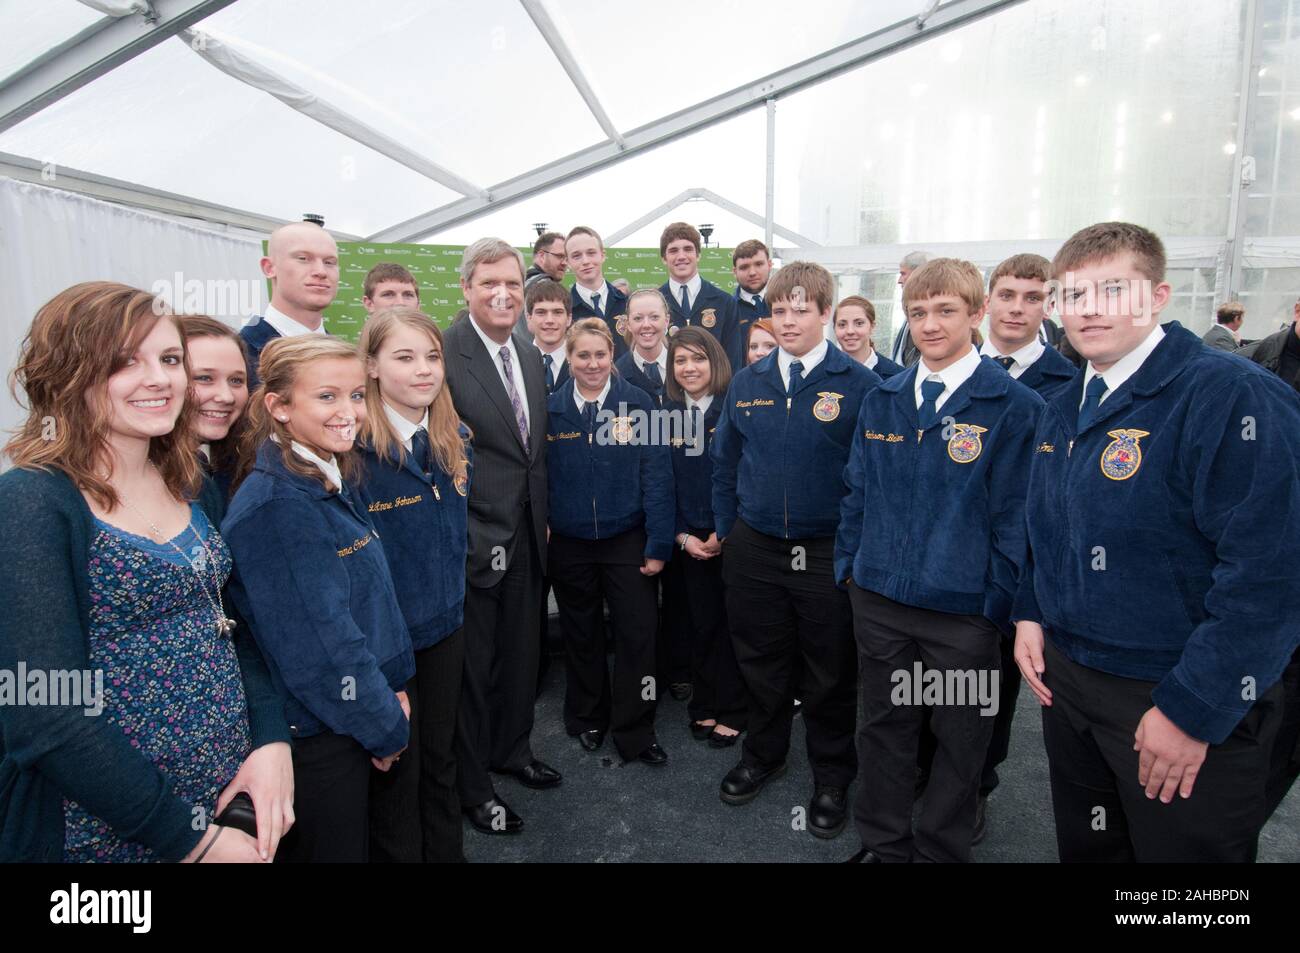 U.S. Department of Agriculture (USDA) Secretary Tom Vilsack encuraged young prople such as the representatives of Iowa's FFA during his key note speech and then spent time immedately after the grand opening ceremony of the BioProcess Algae facility at Green Plains Renewable Energy (GPRE), Inc. on April 15, 2011 in Shenandoah, IA. Stock Photo